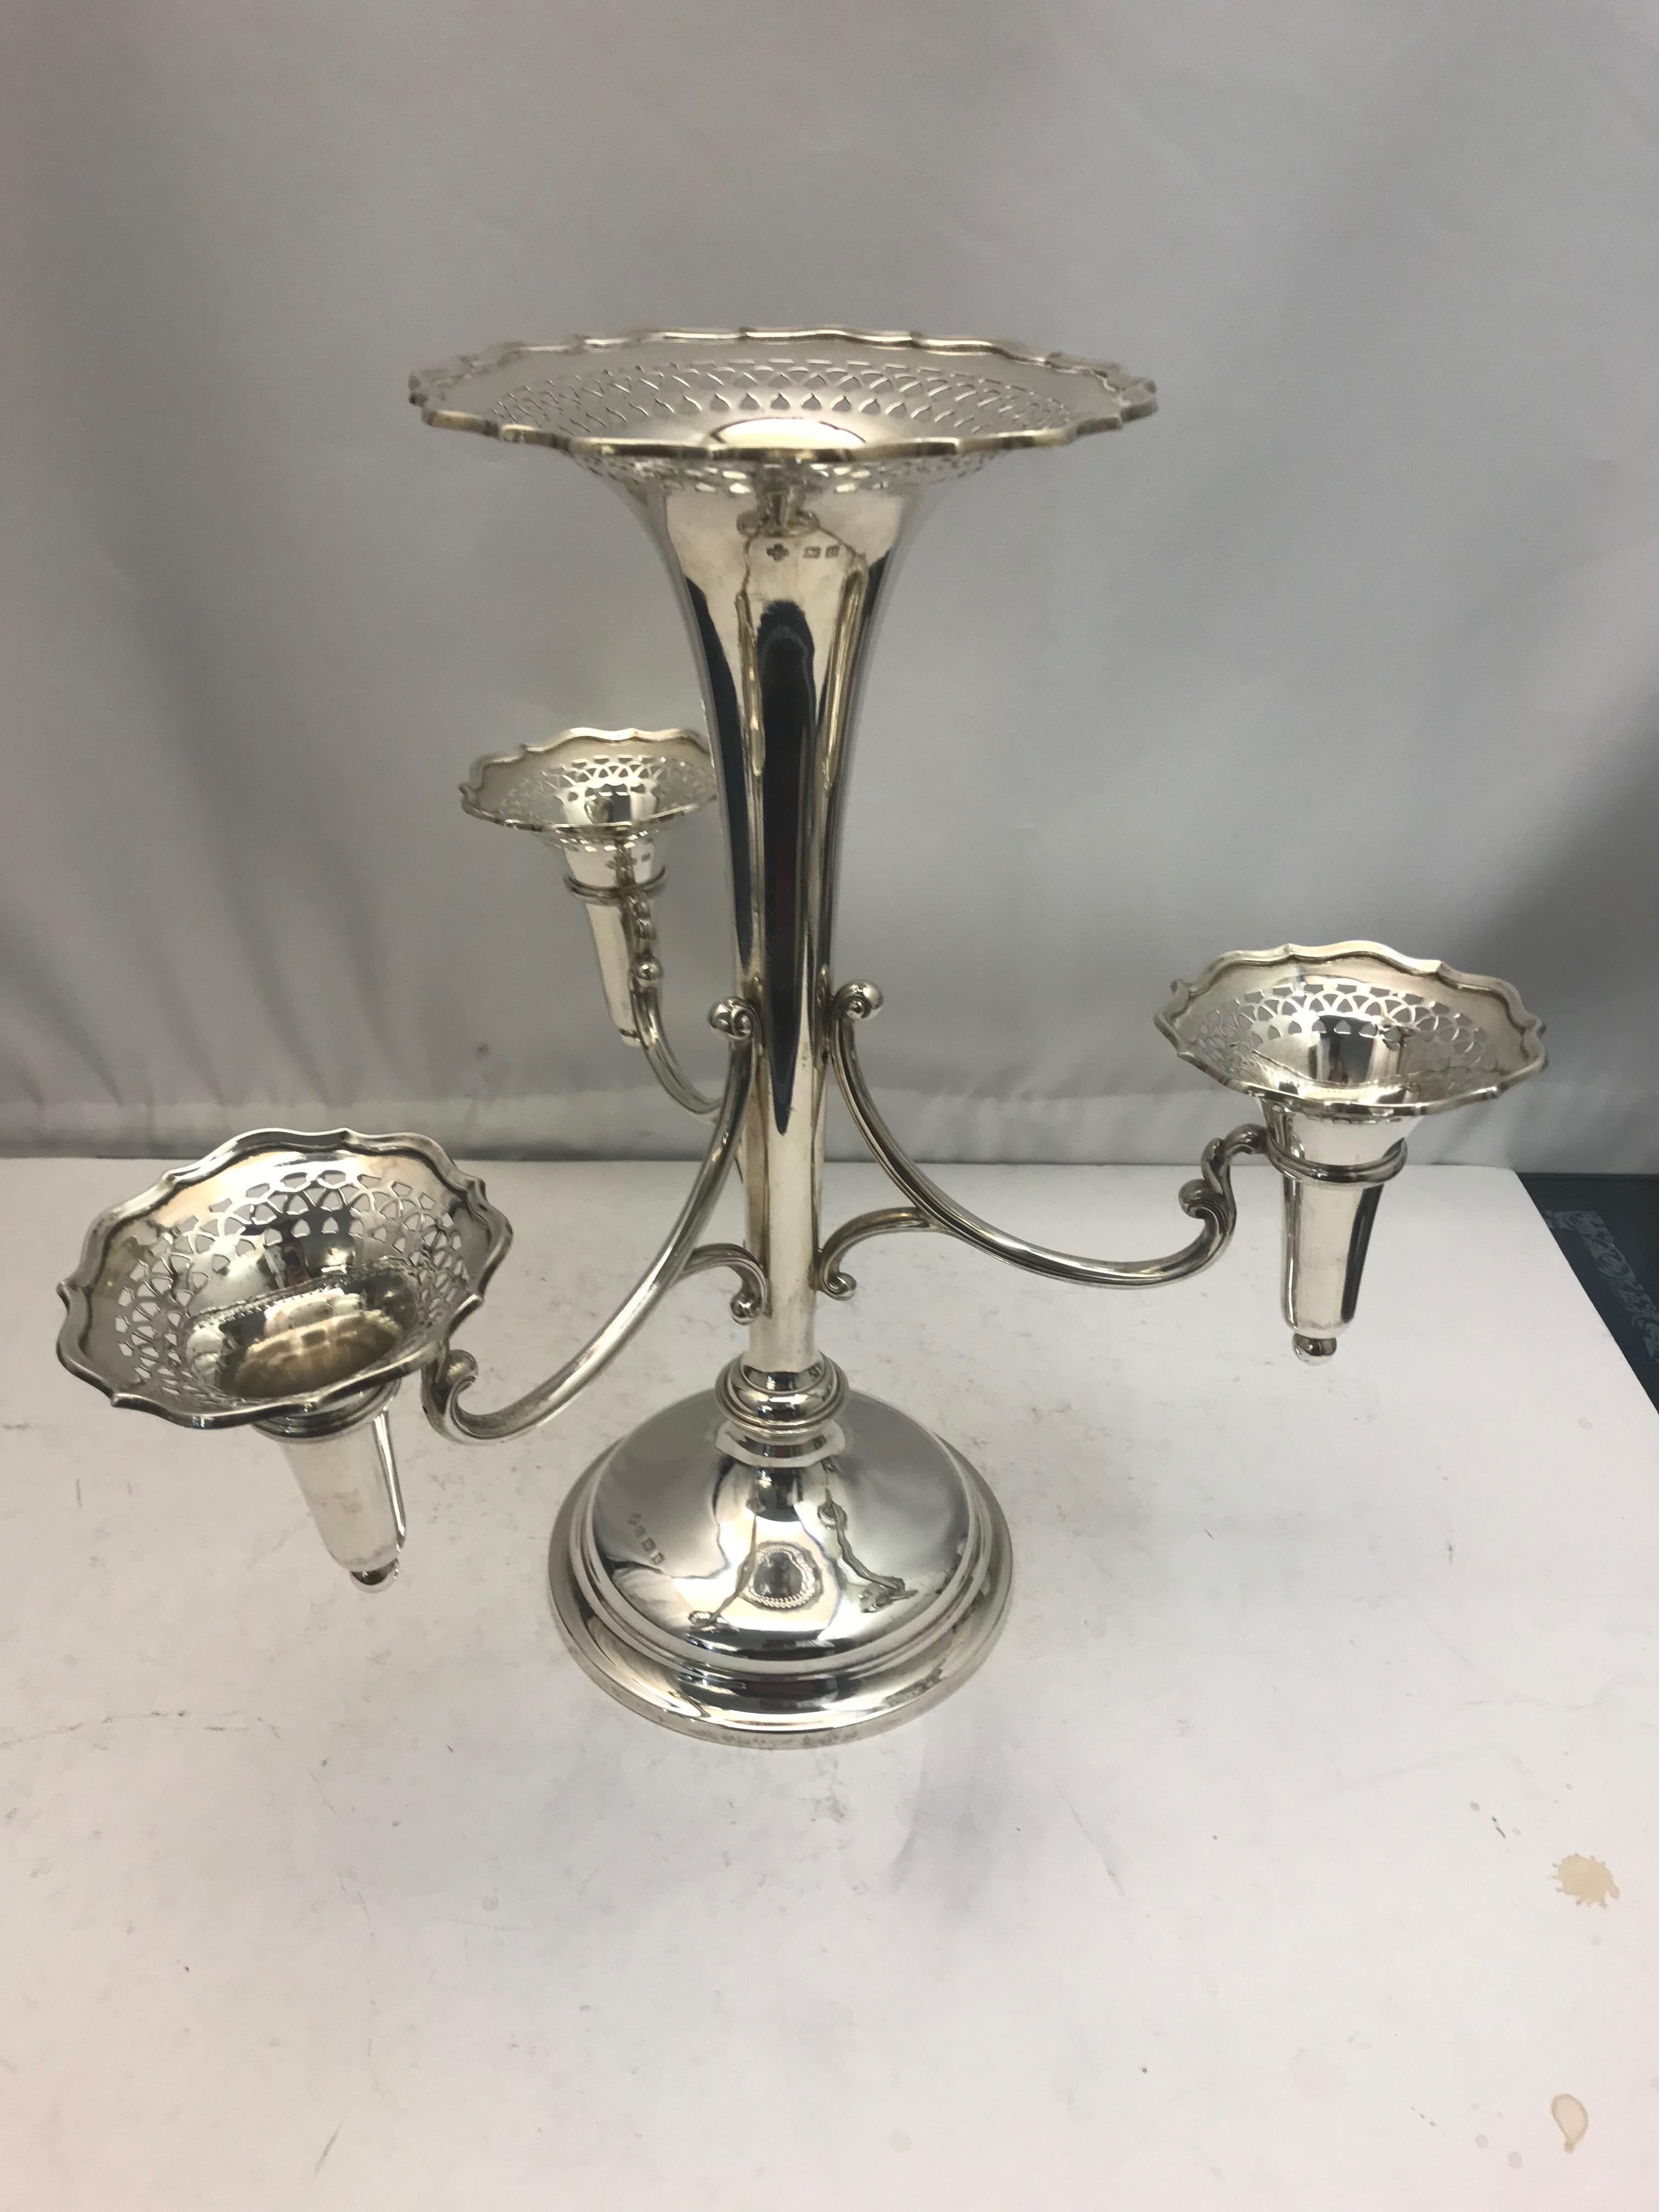 An antique sterling silver flower epergne with one central vase and 3 surrounding it.

Made by Horace Woodward.

Hallmarked on base.

Weight 915 grams.
 